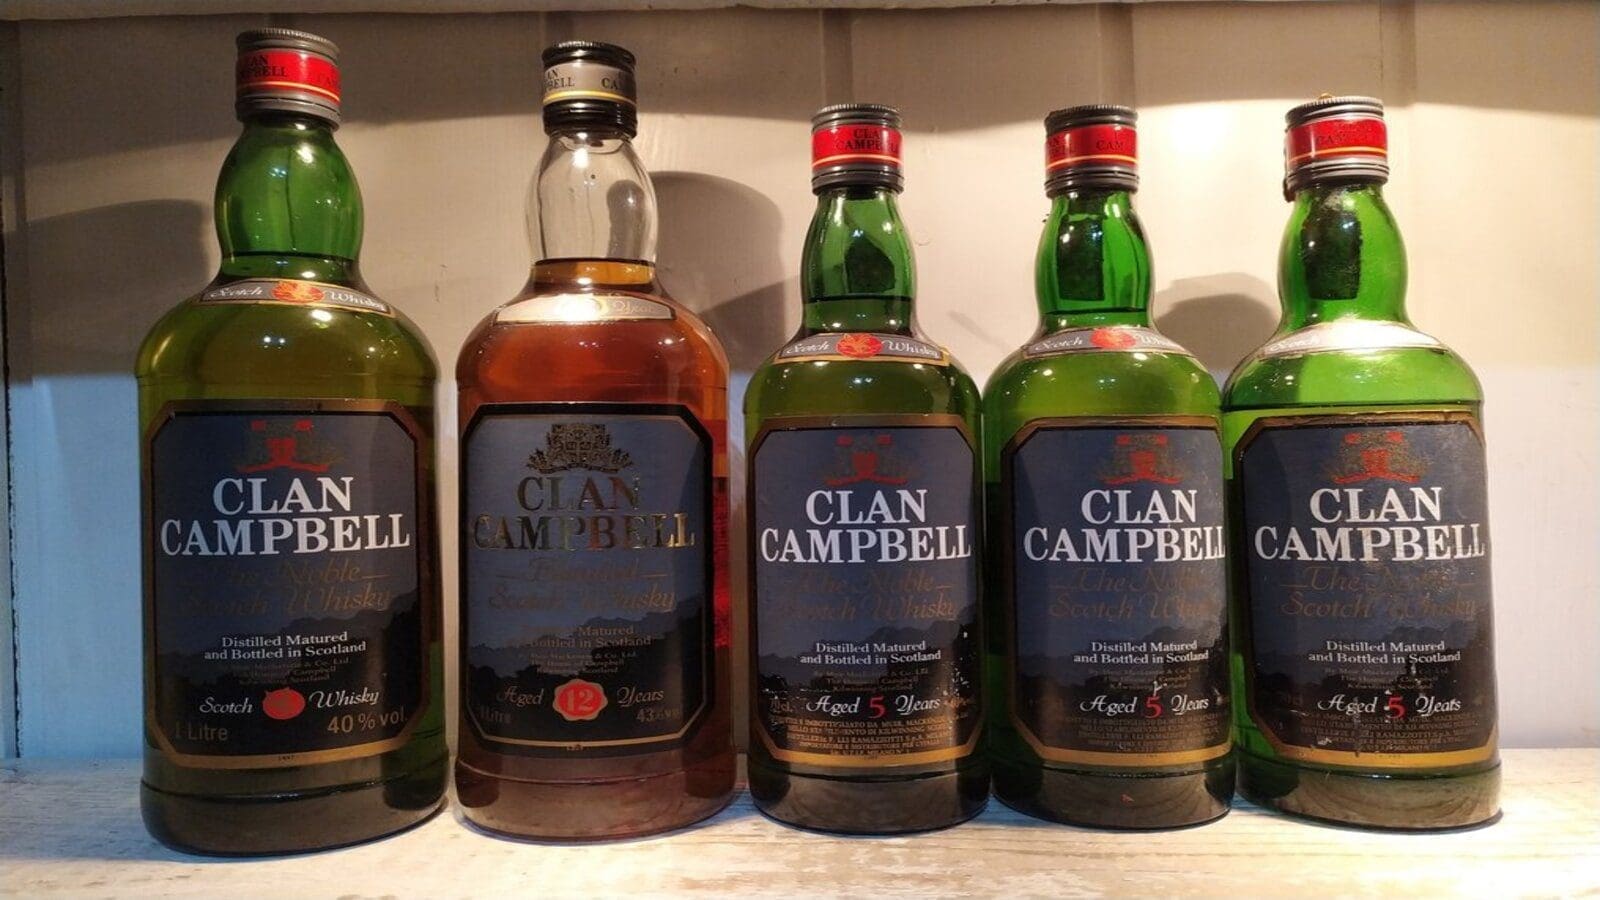 Pernod Ricard agrees to offload Clan Campbell Blended Scotch Whisky brand to Stock Spirits Group